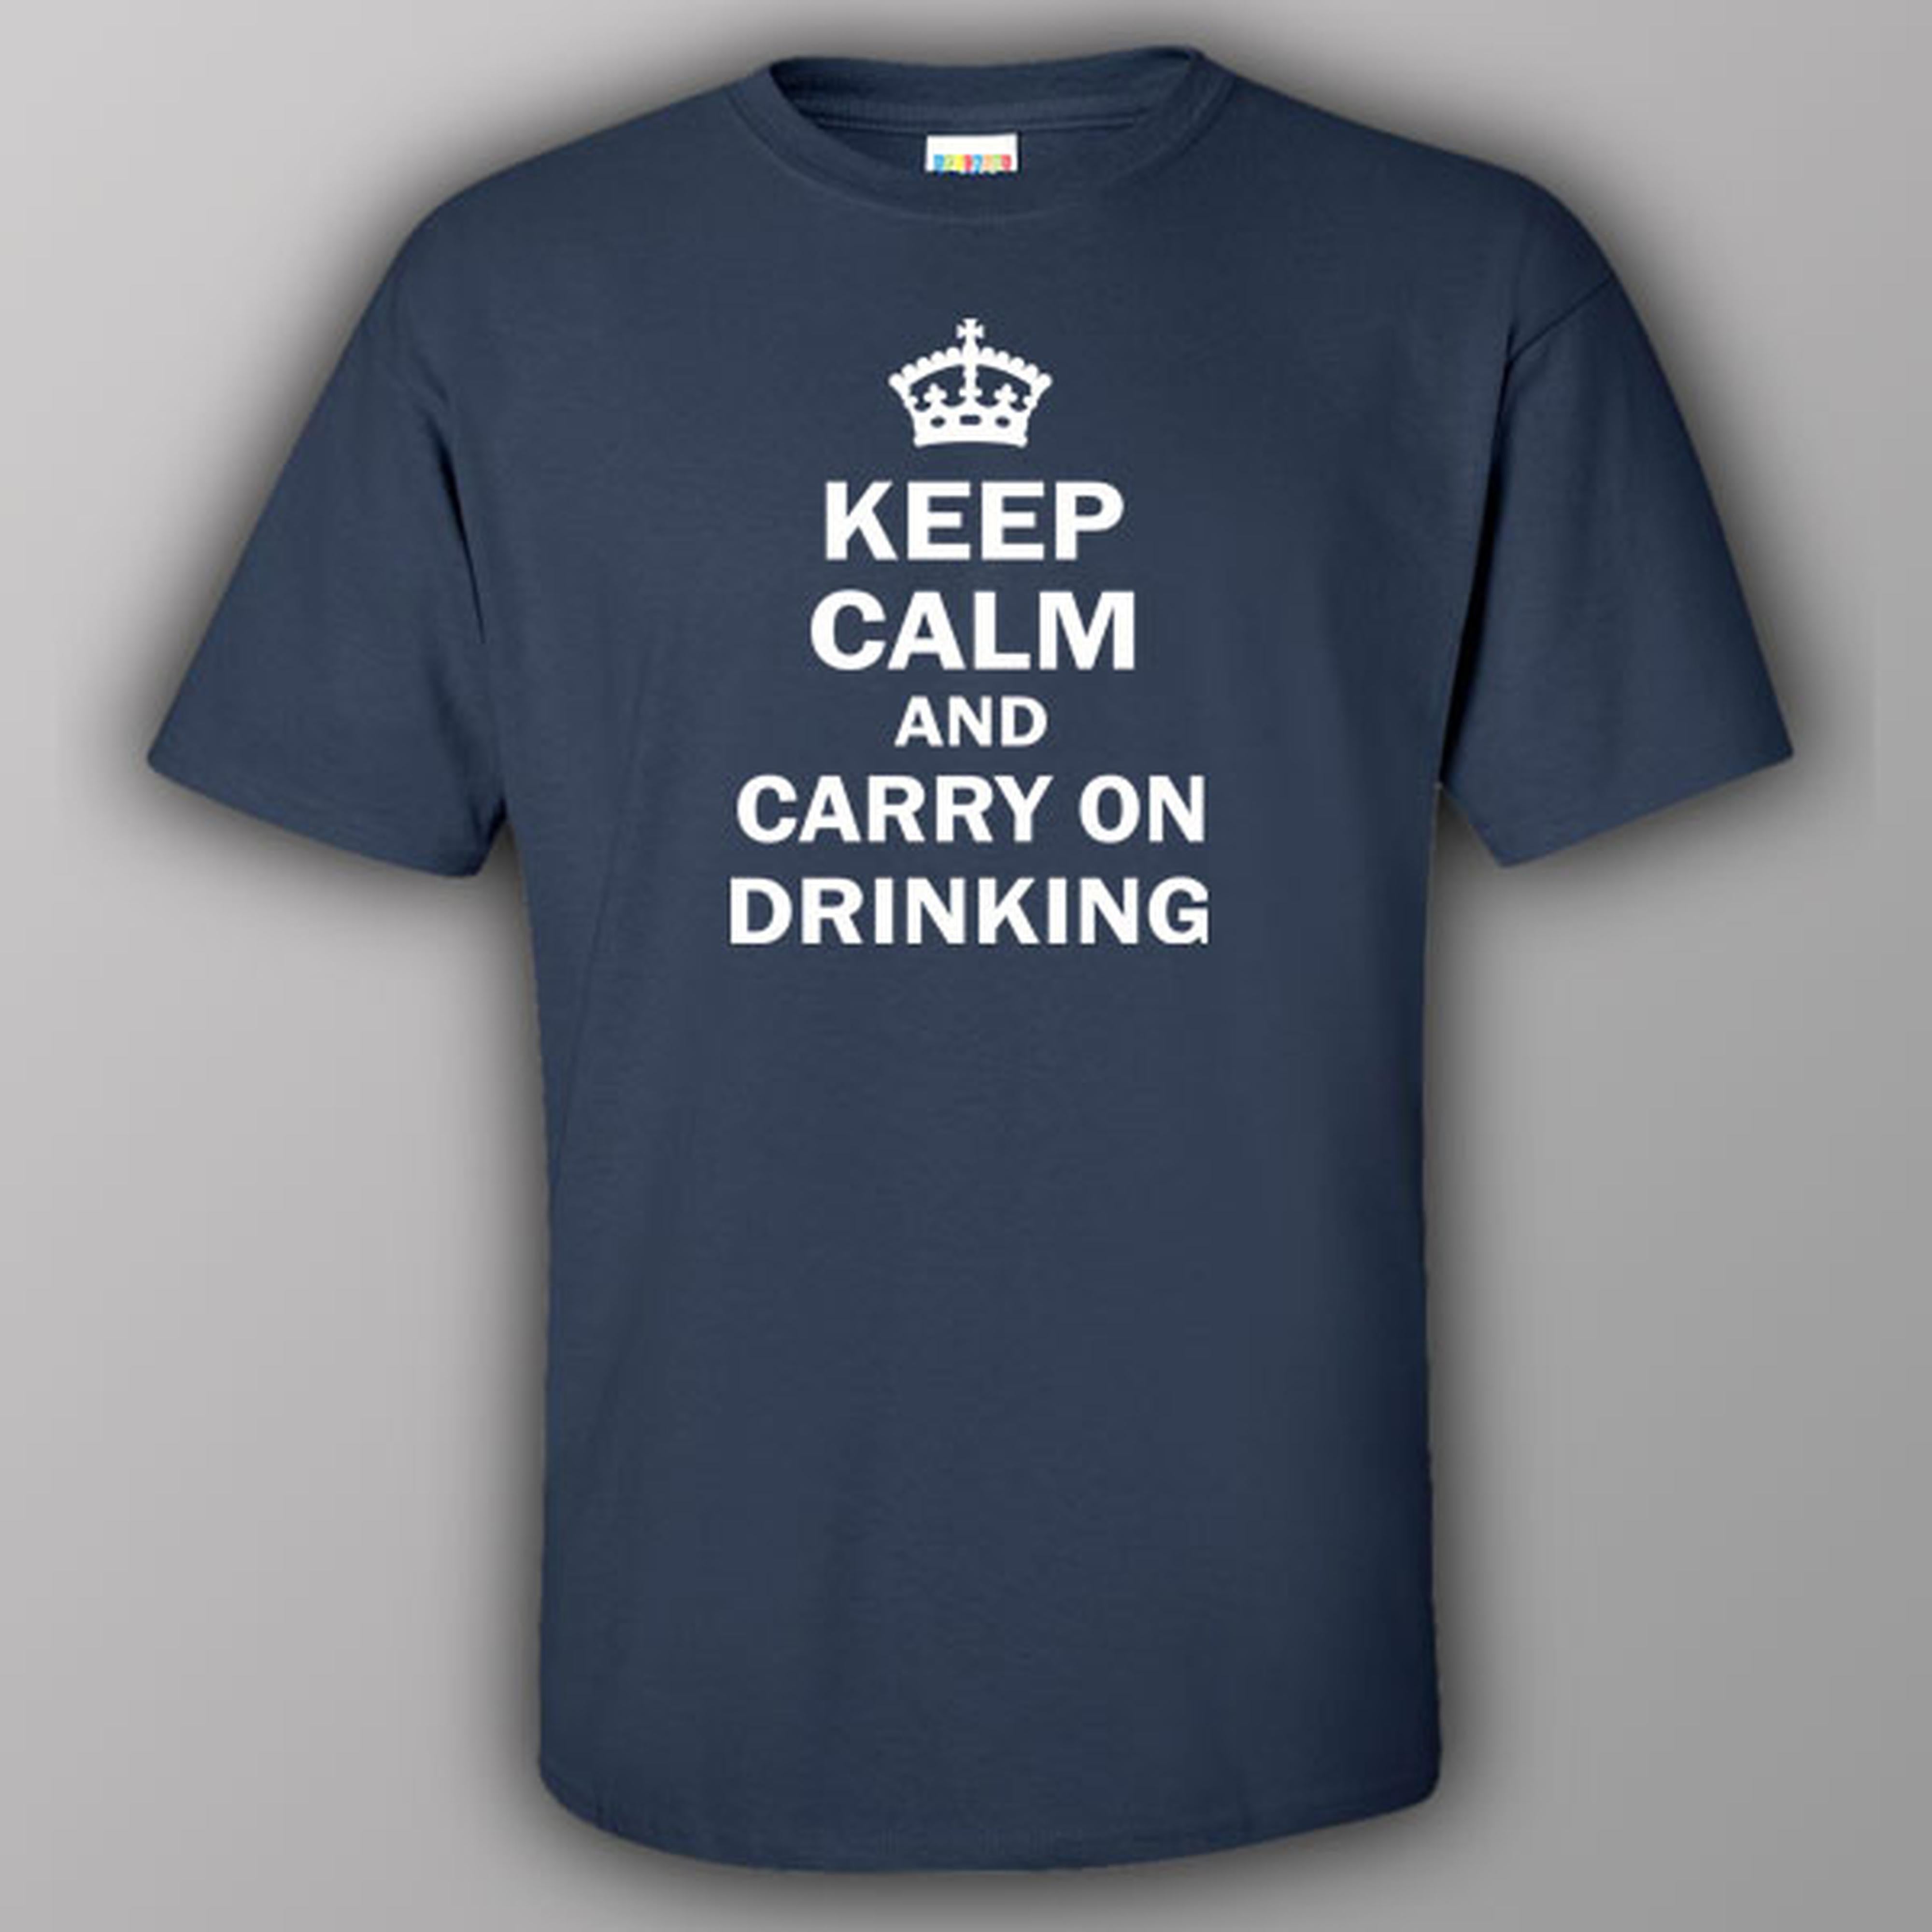 Keep calm and carry on drinking - T-shirt